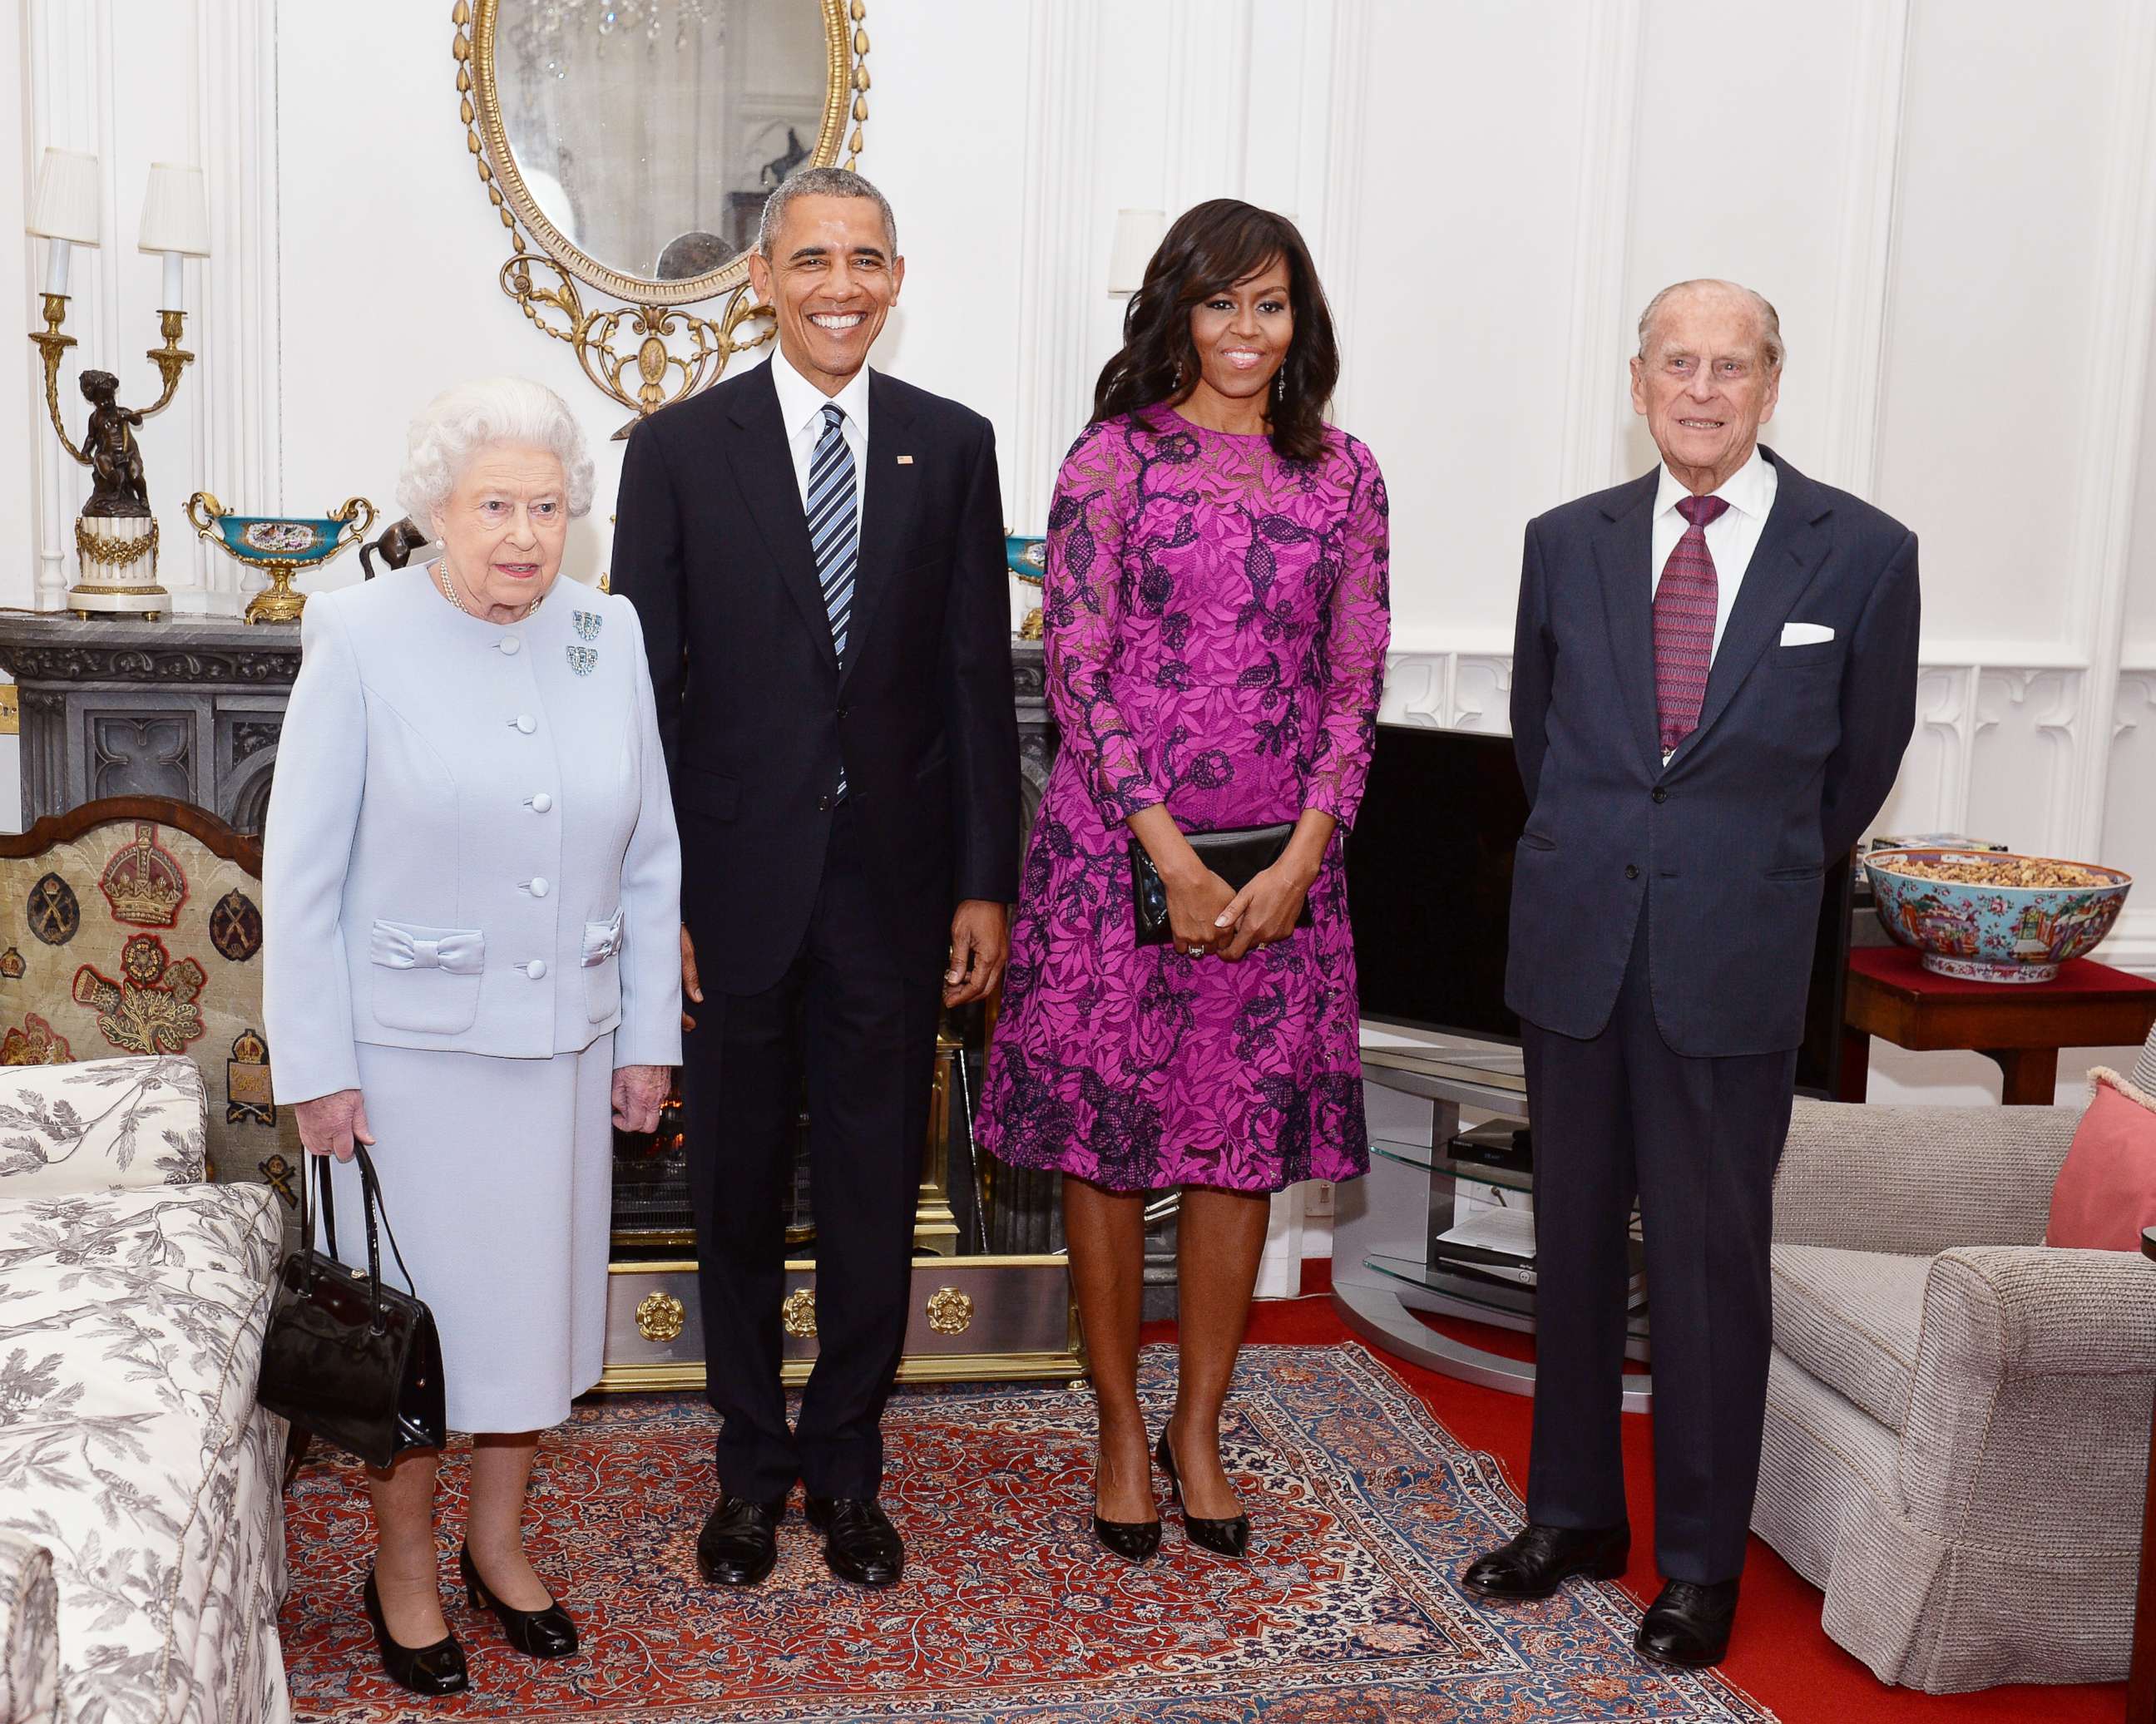 PHOTO: Queen Elizabeth II and Prince Philip, Duke of Edinburgh, stand with President Barack Obama and first lady Michelle Obama in the Oak Room at Windsor Castle on April 22, 2016 in Windsor, England.